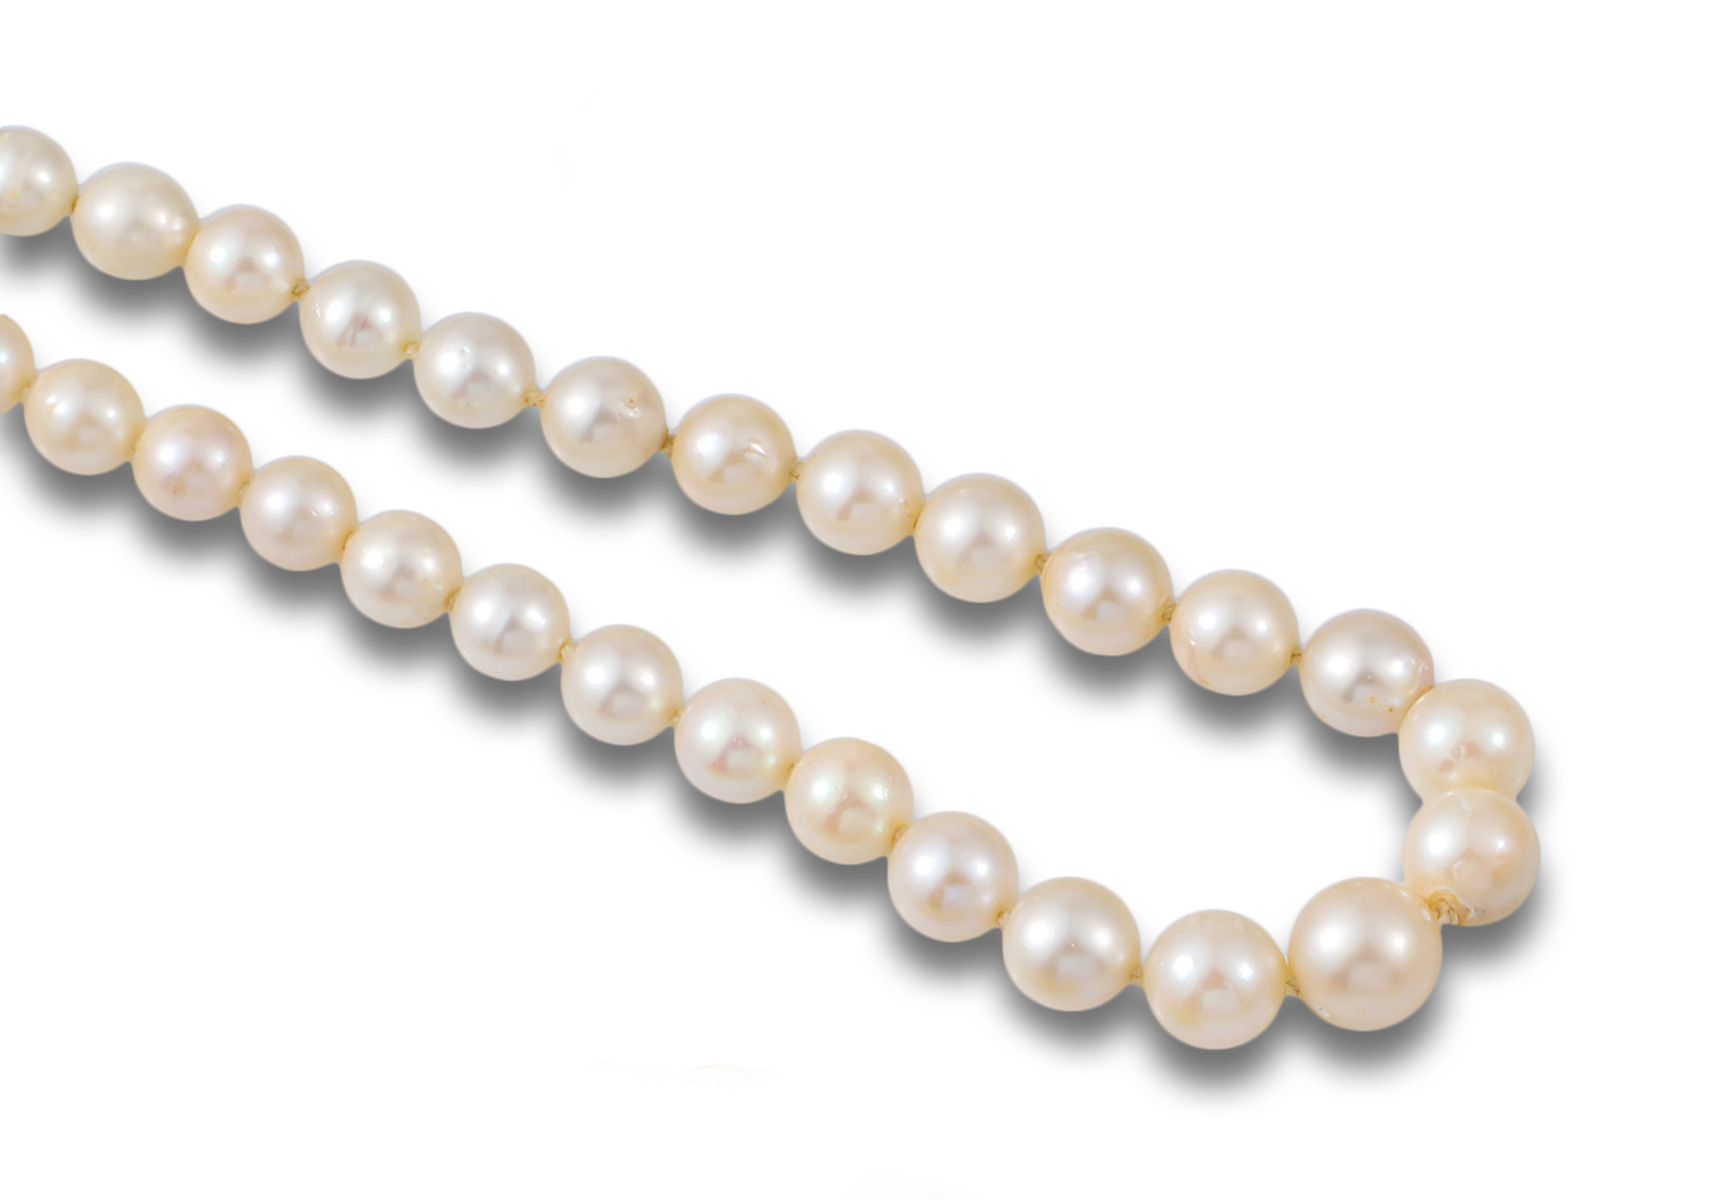 PEARL NECKLACE WITH YELLOW GOLD Necklace made up of 62 cultured pearls arranged &hellip;